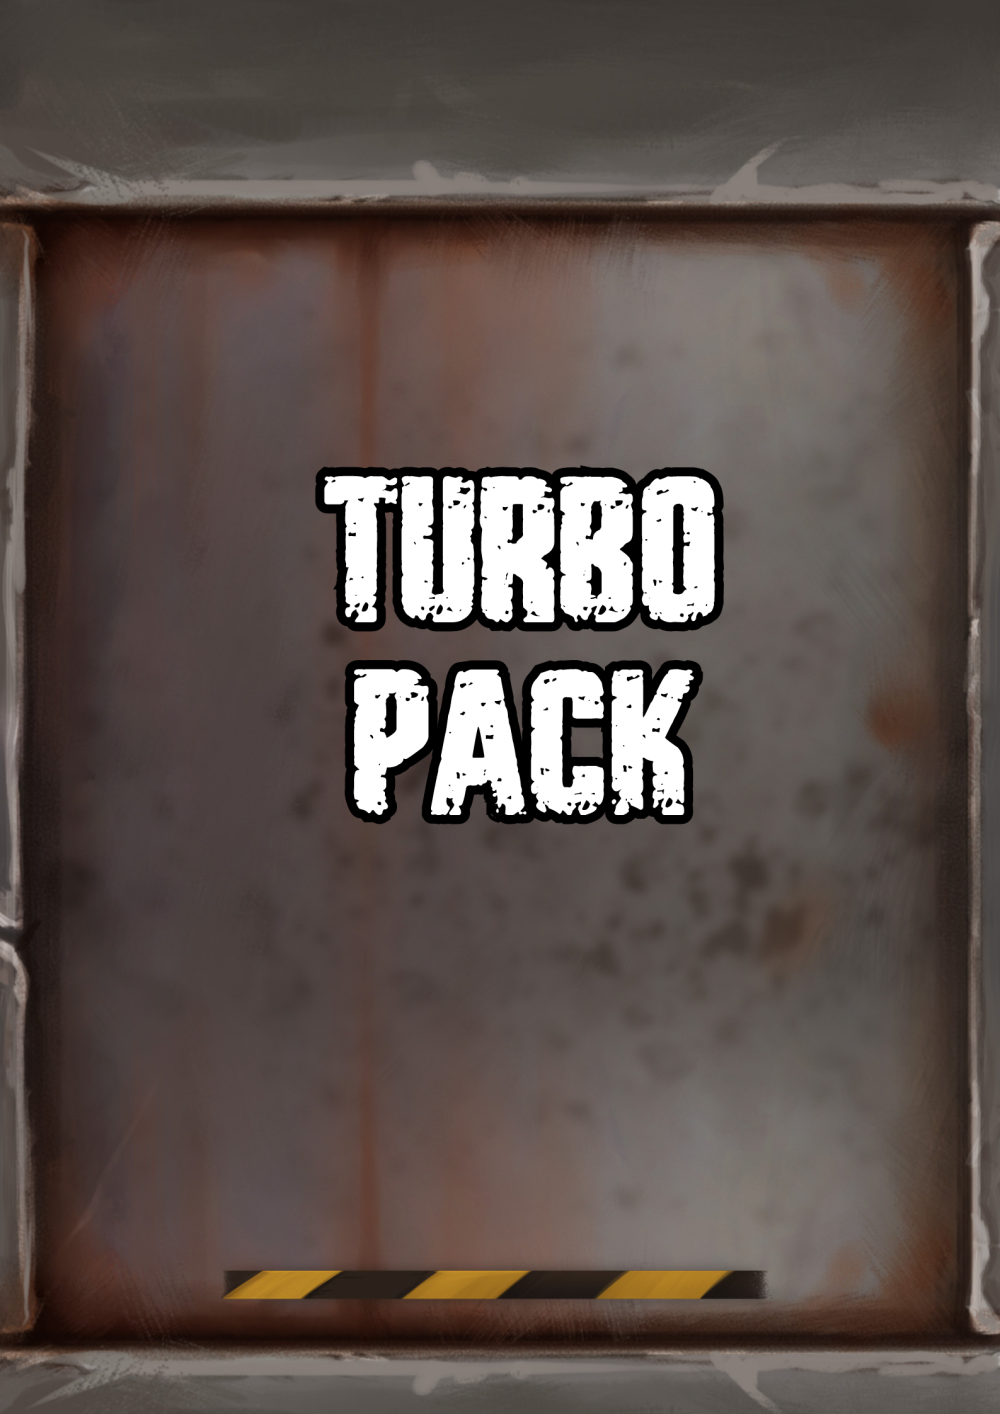 Armored bash turbo pack's Cover